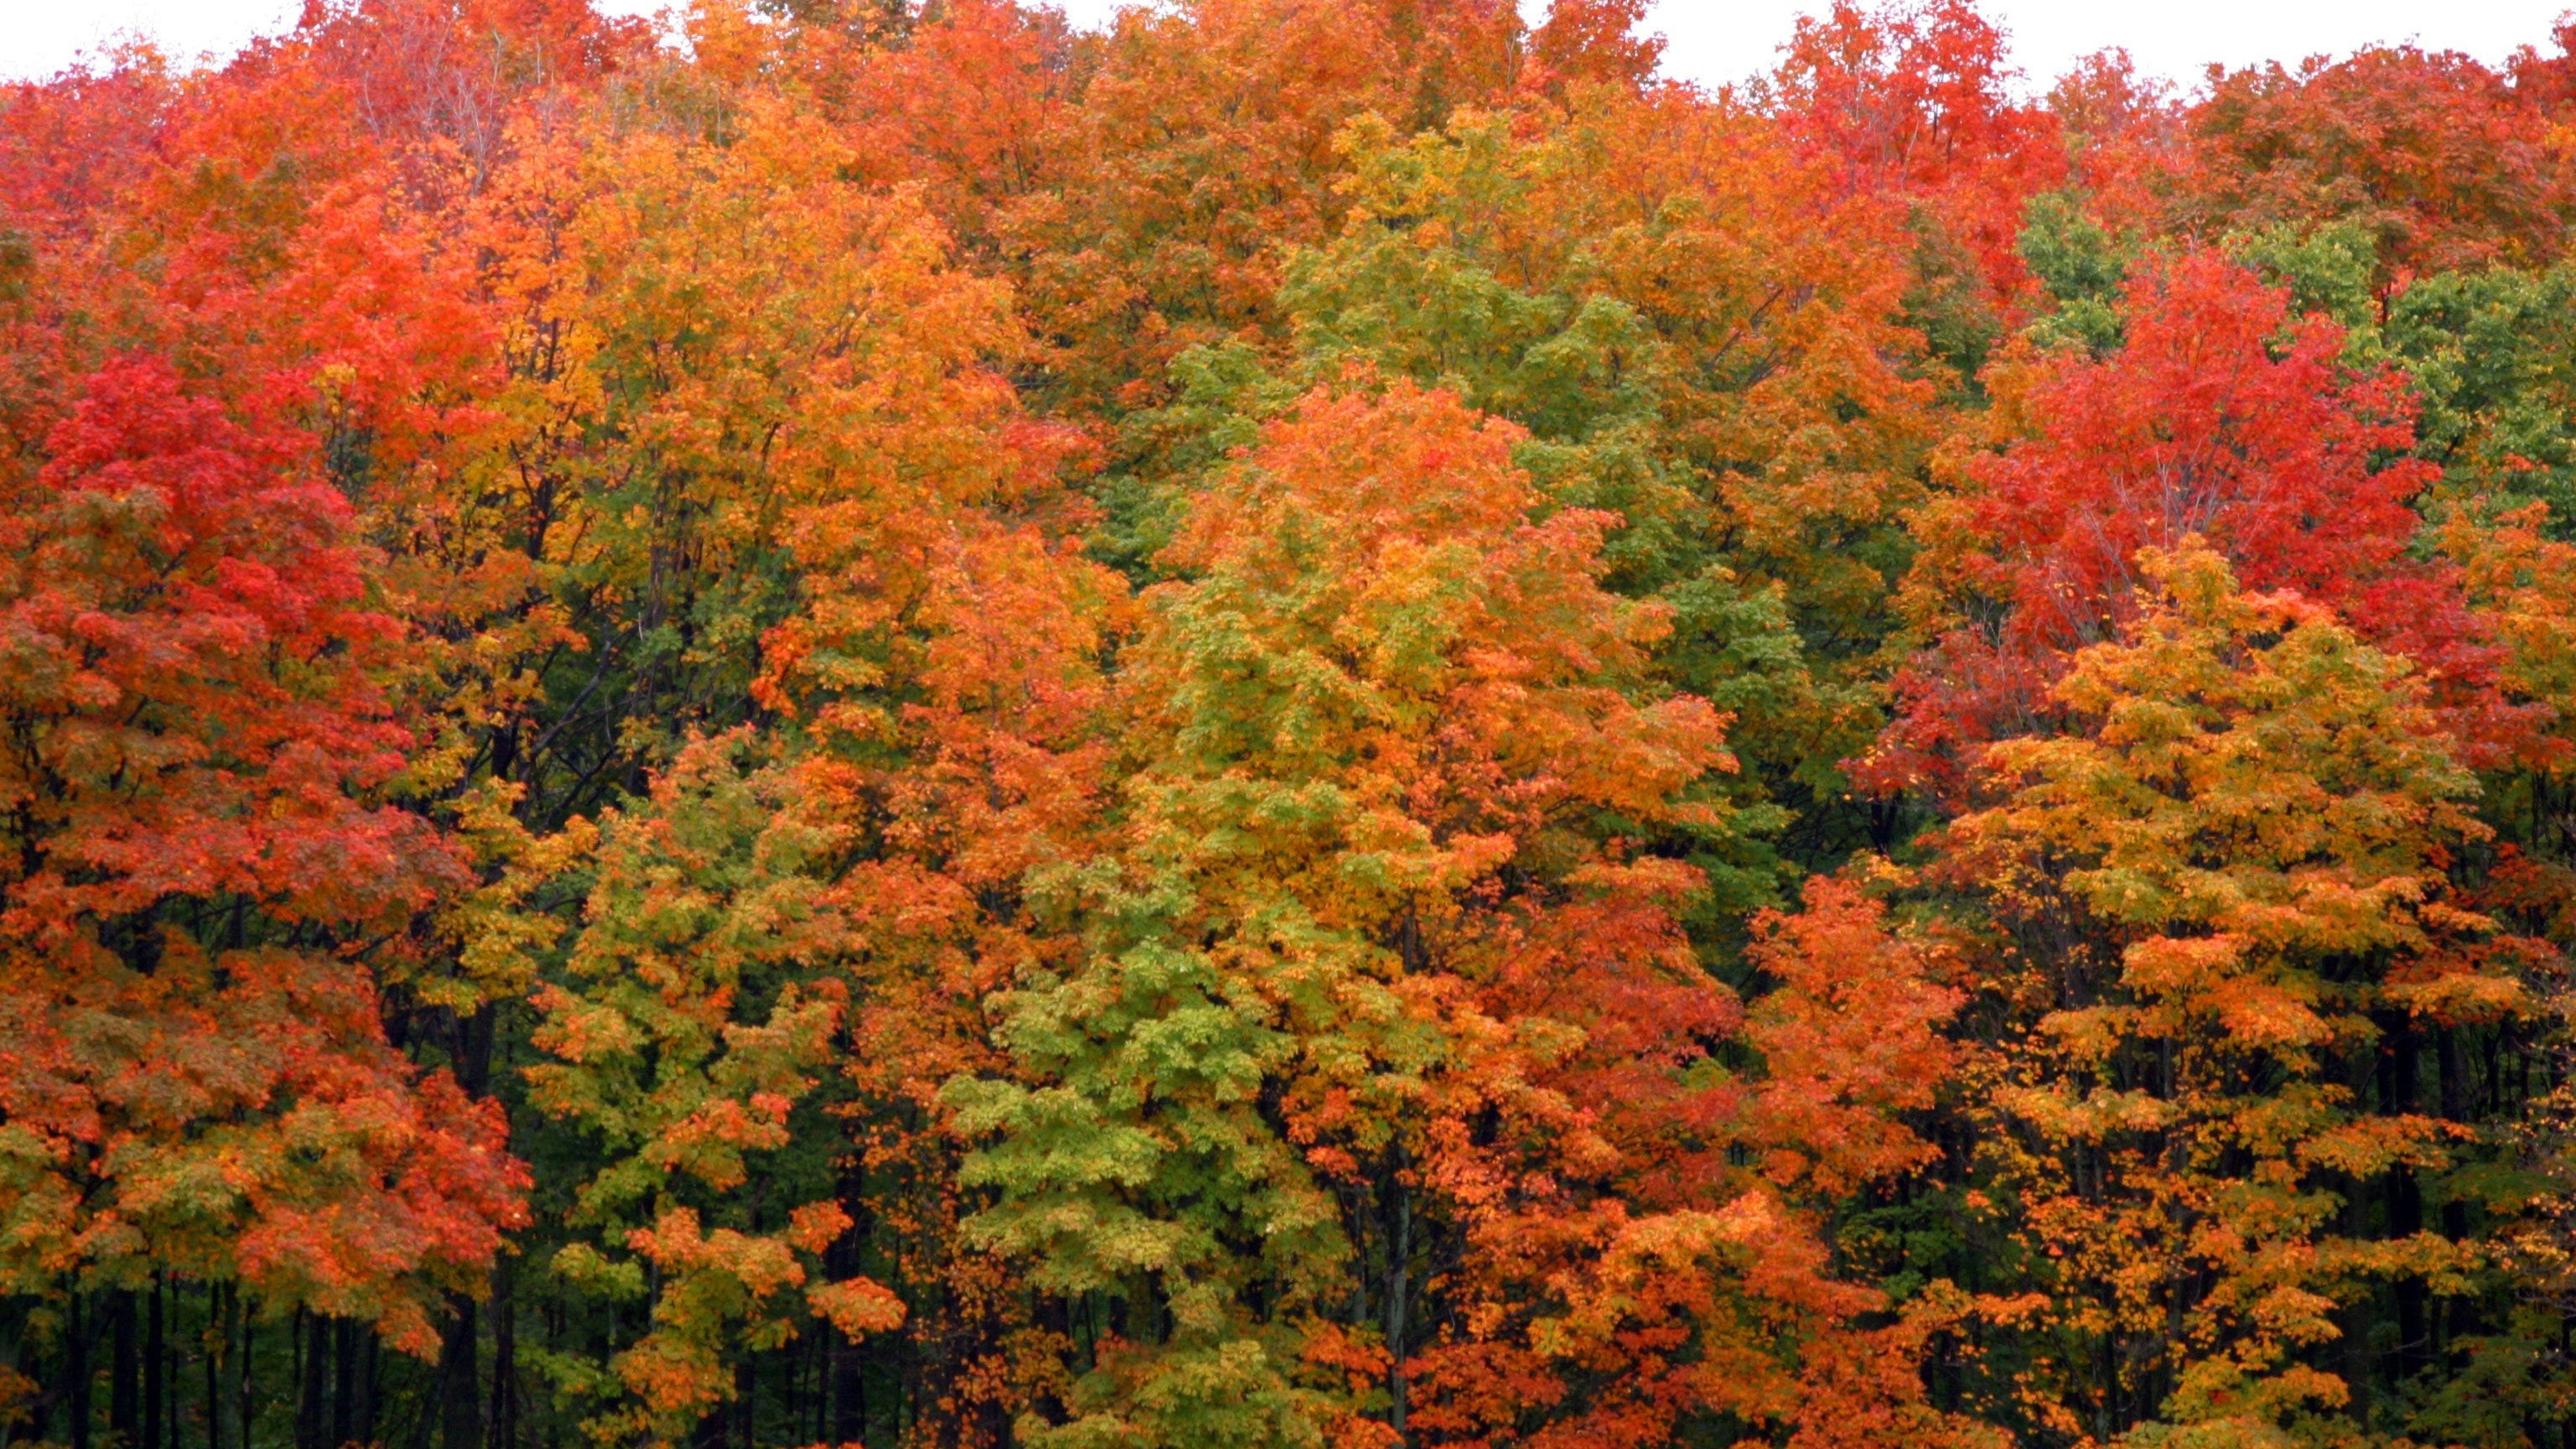 5 spots to see Michigan's rich fall colors